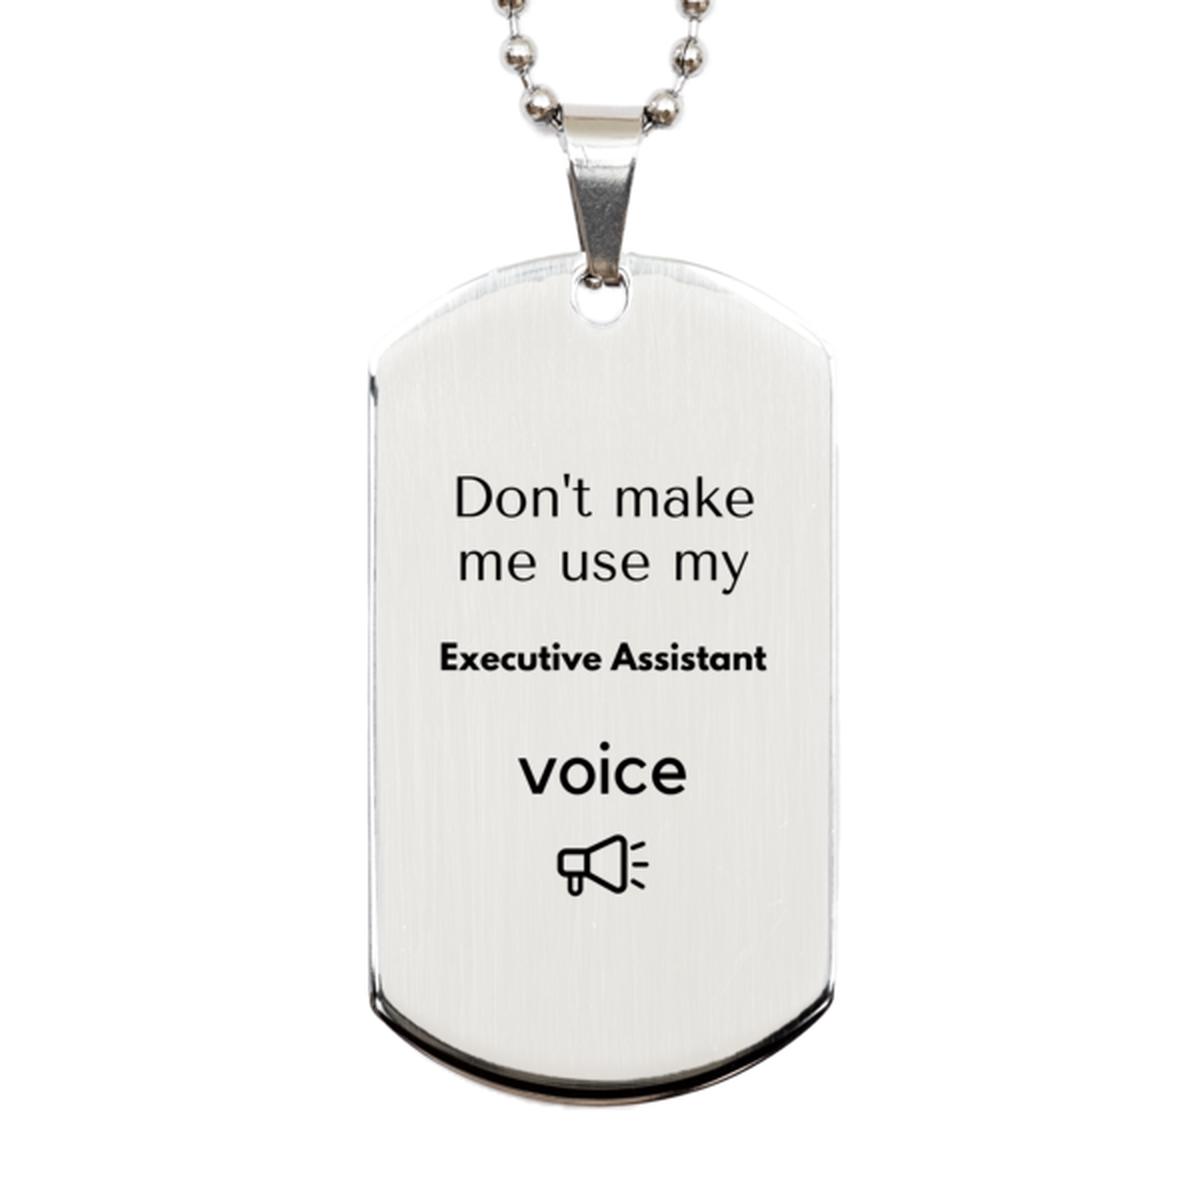 Don't make me use my Executive Assistant voice, Sarcasm Executive Assistant Gifts, Christmas Executive Assistant Silver Dog Tag Birthday Unique Gifts For Executive Assistant Coworkers, Men, Women, Colleague, Friends